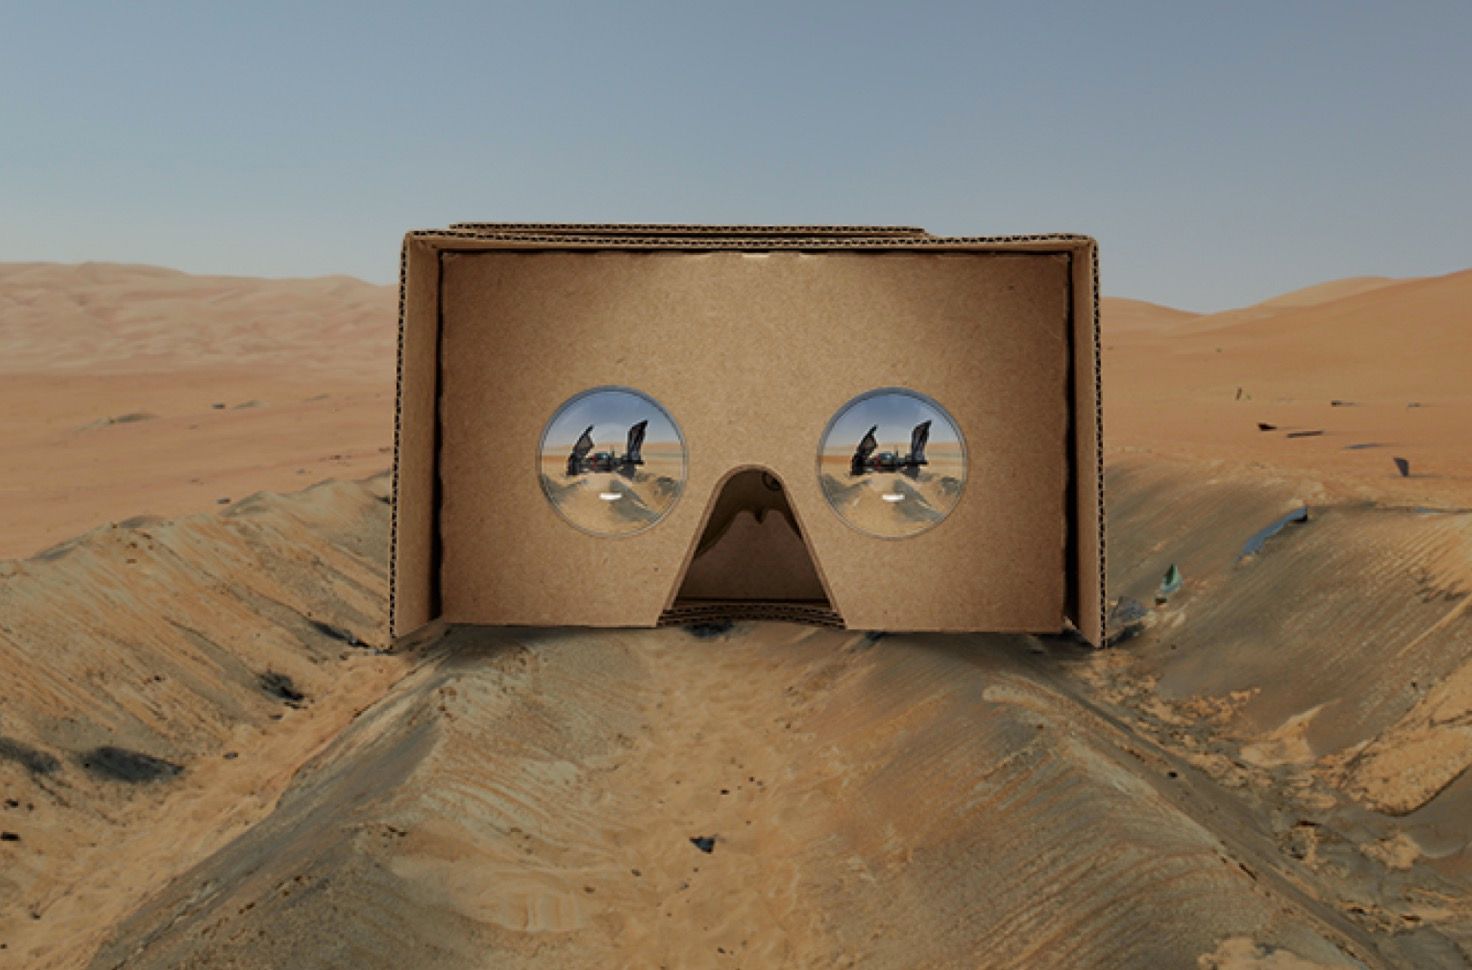 star wars themed vr experience for google cardboard is now out image 2